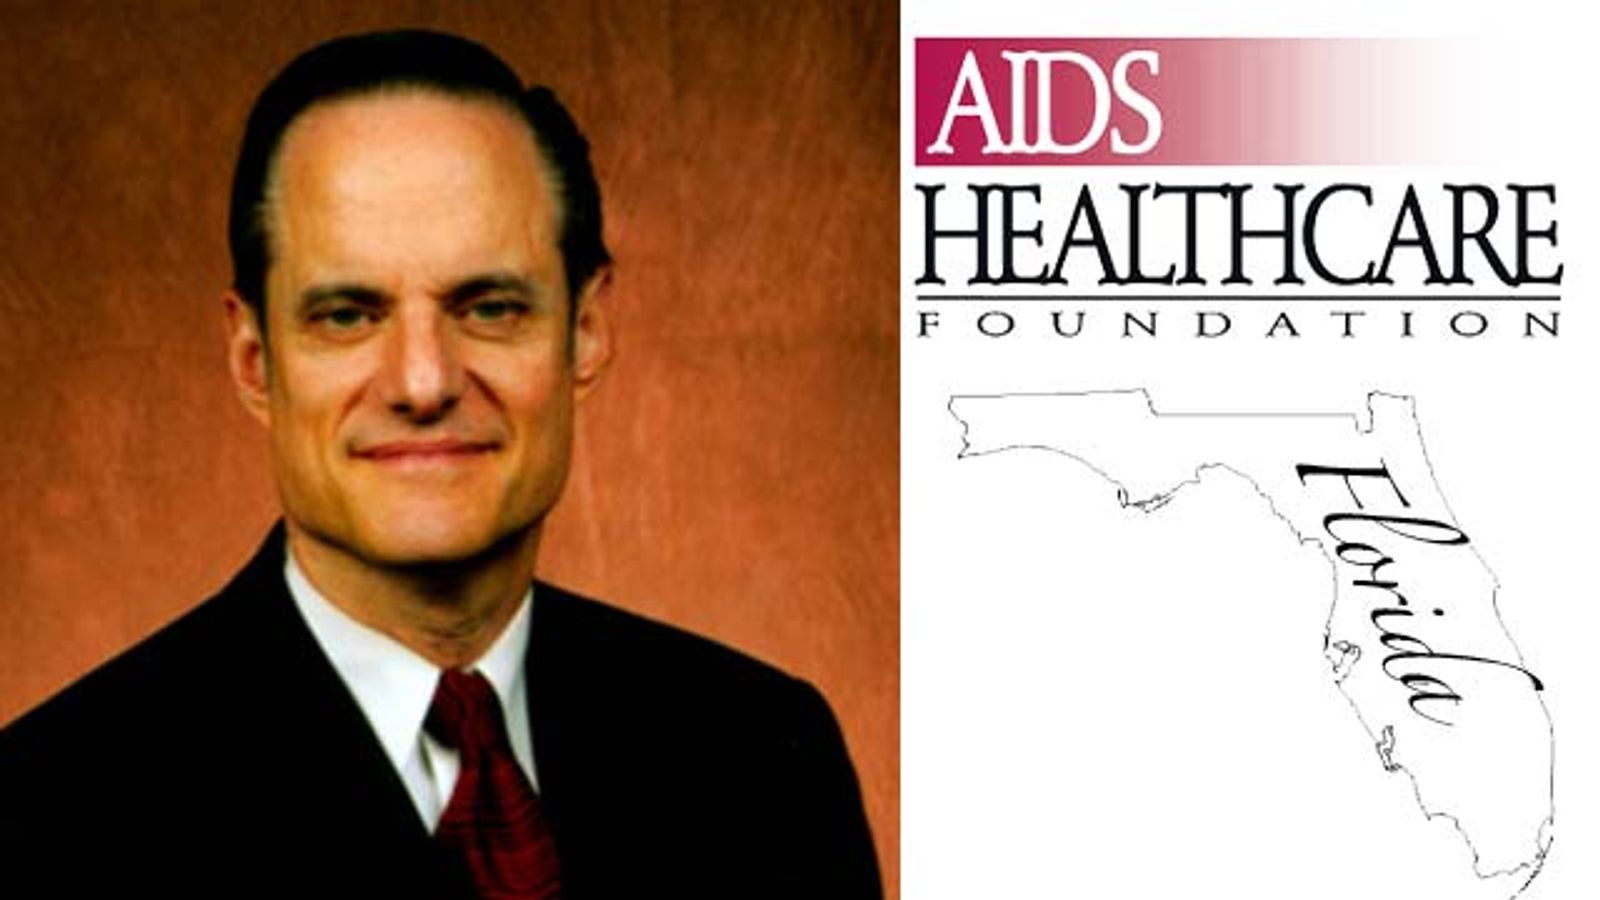 Permit Bill Sponsors Got Donations from AIDS Healthcare